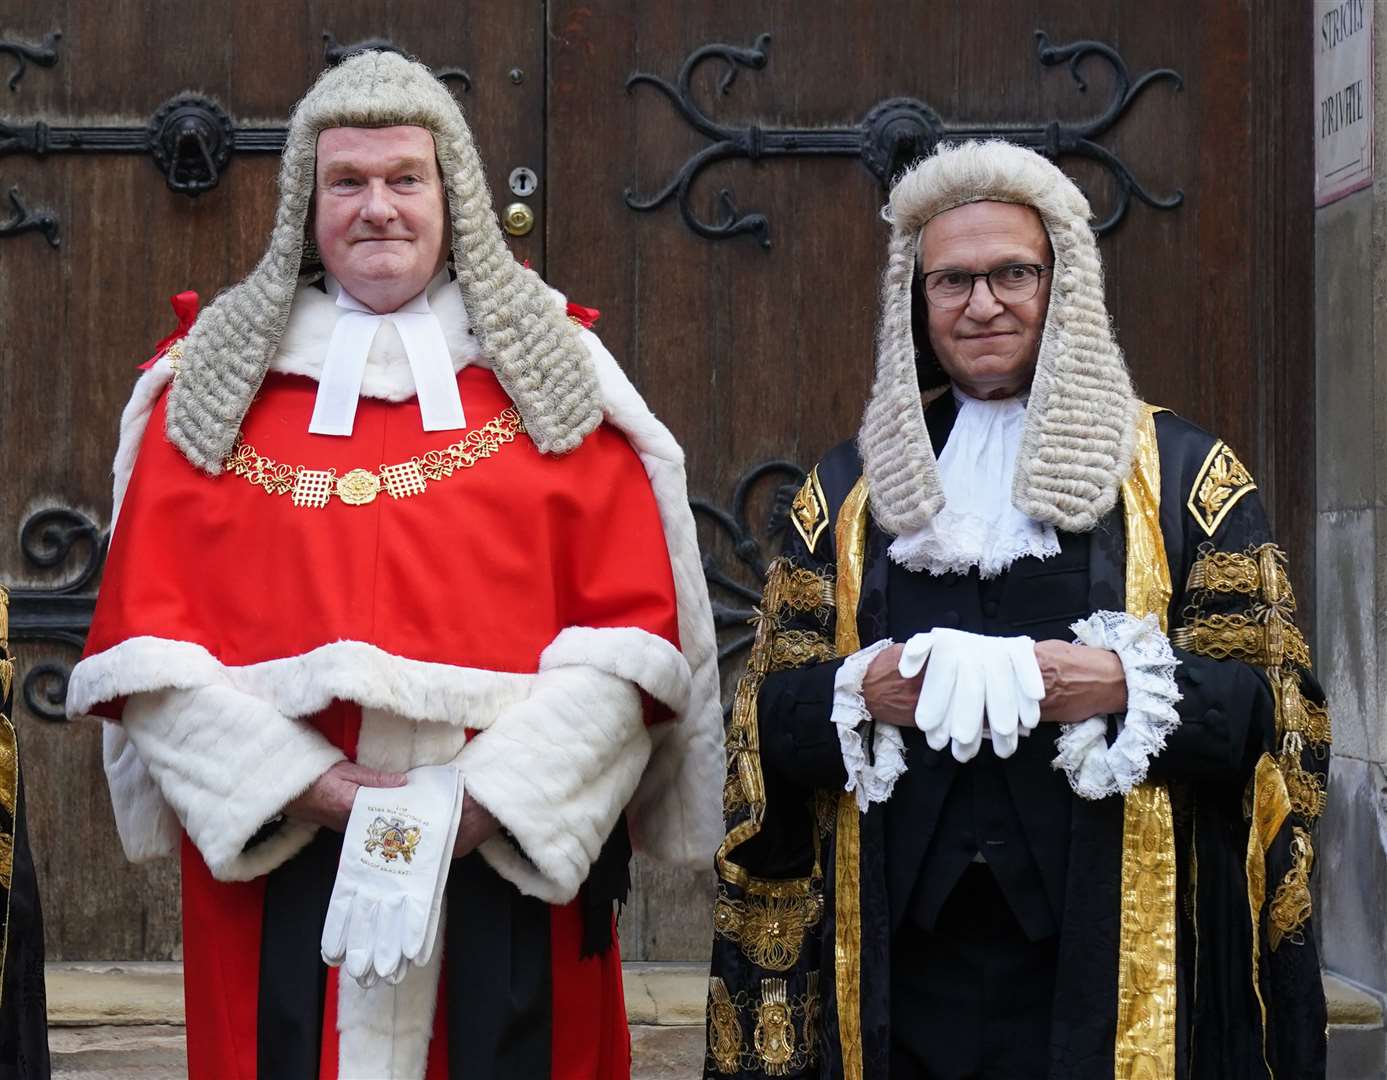 Lord Chief Justice Lord Burnett (left) and Master of the Rolls Sir Geoffrey Vos, two of the judges who heard the appeal (Gareth Fuller/PA)